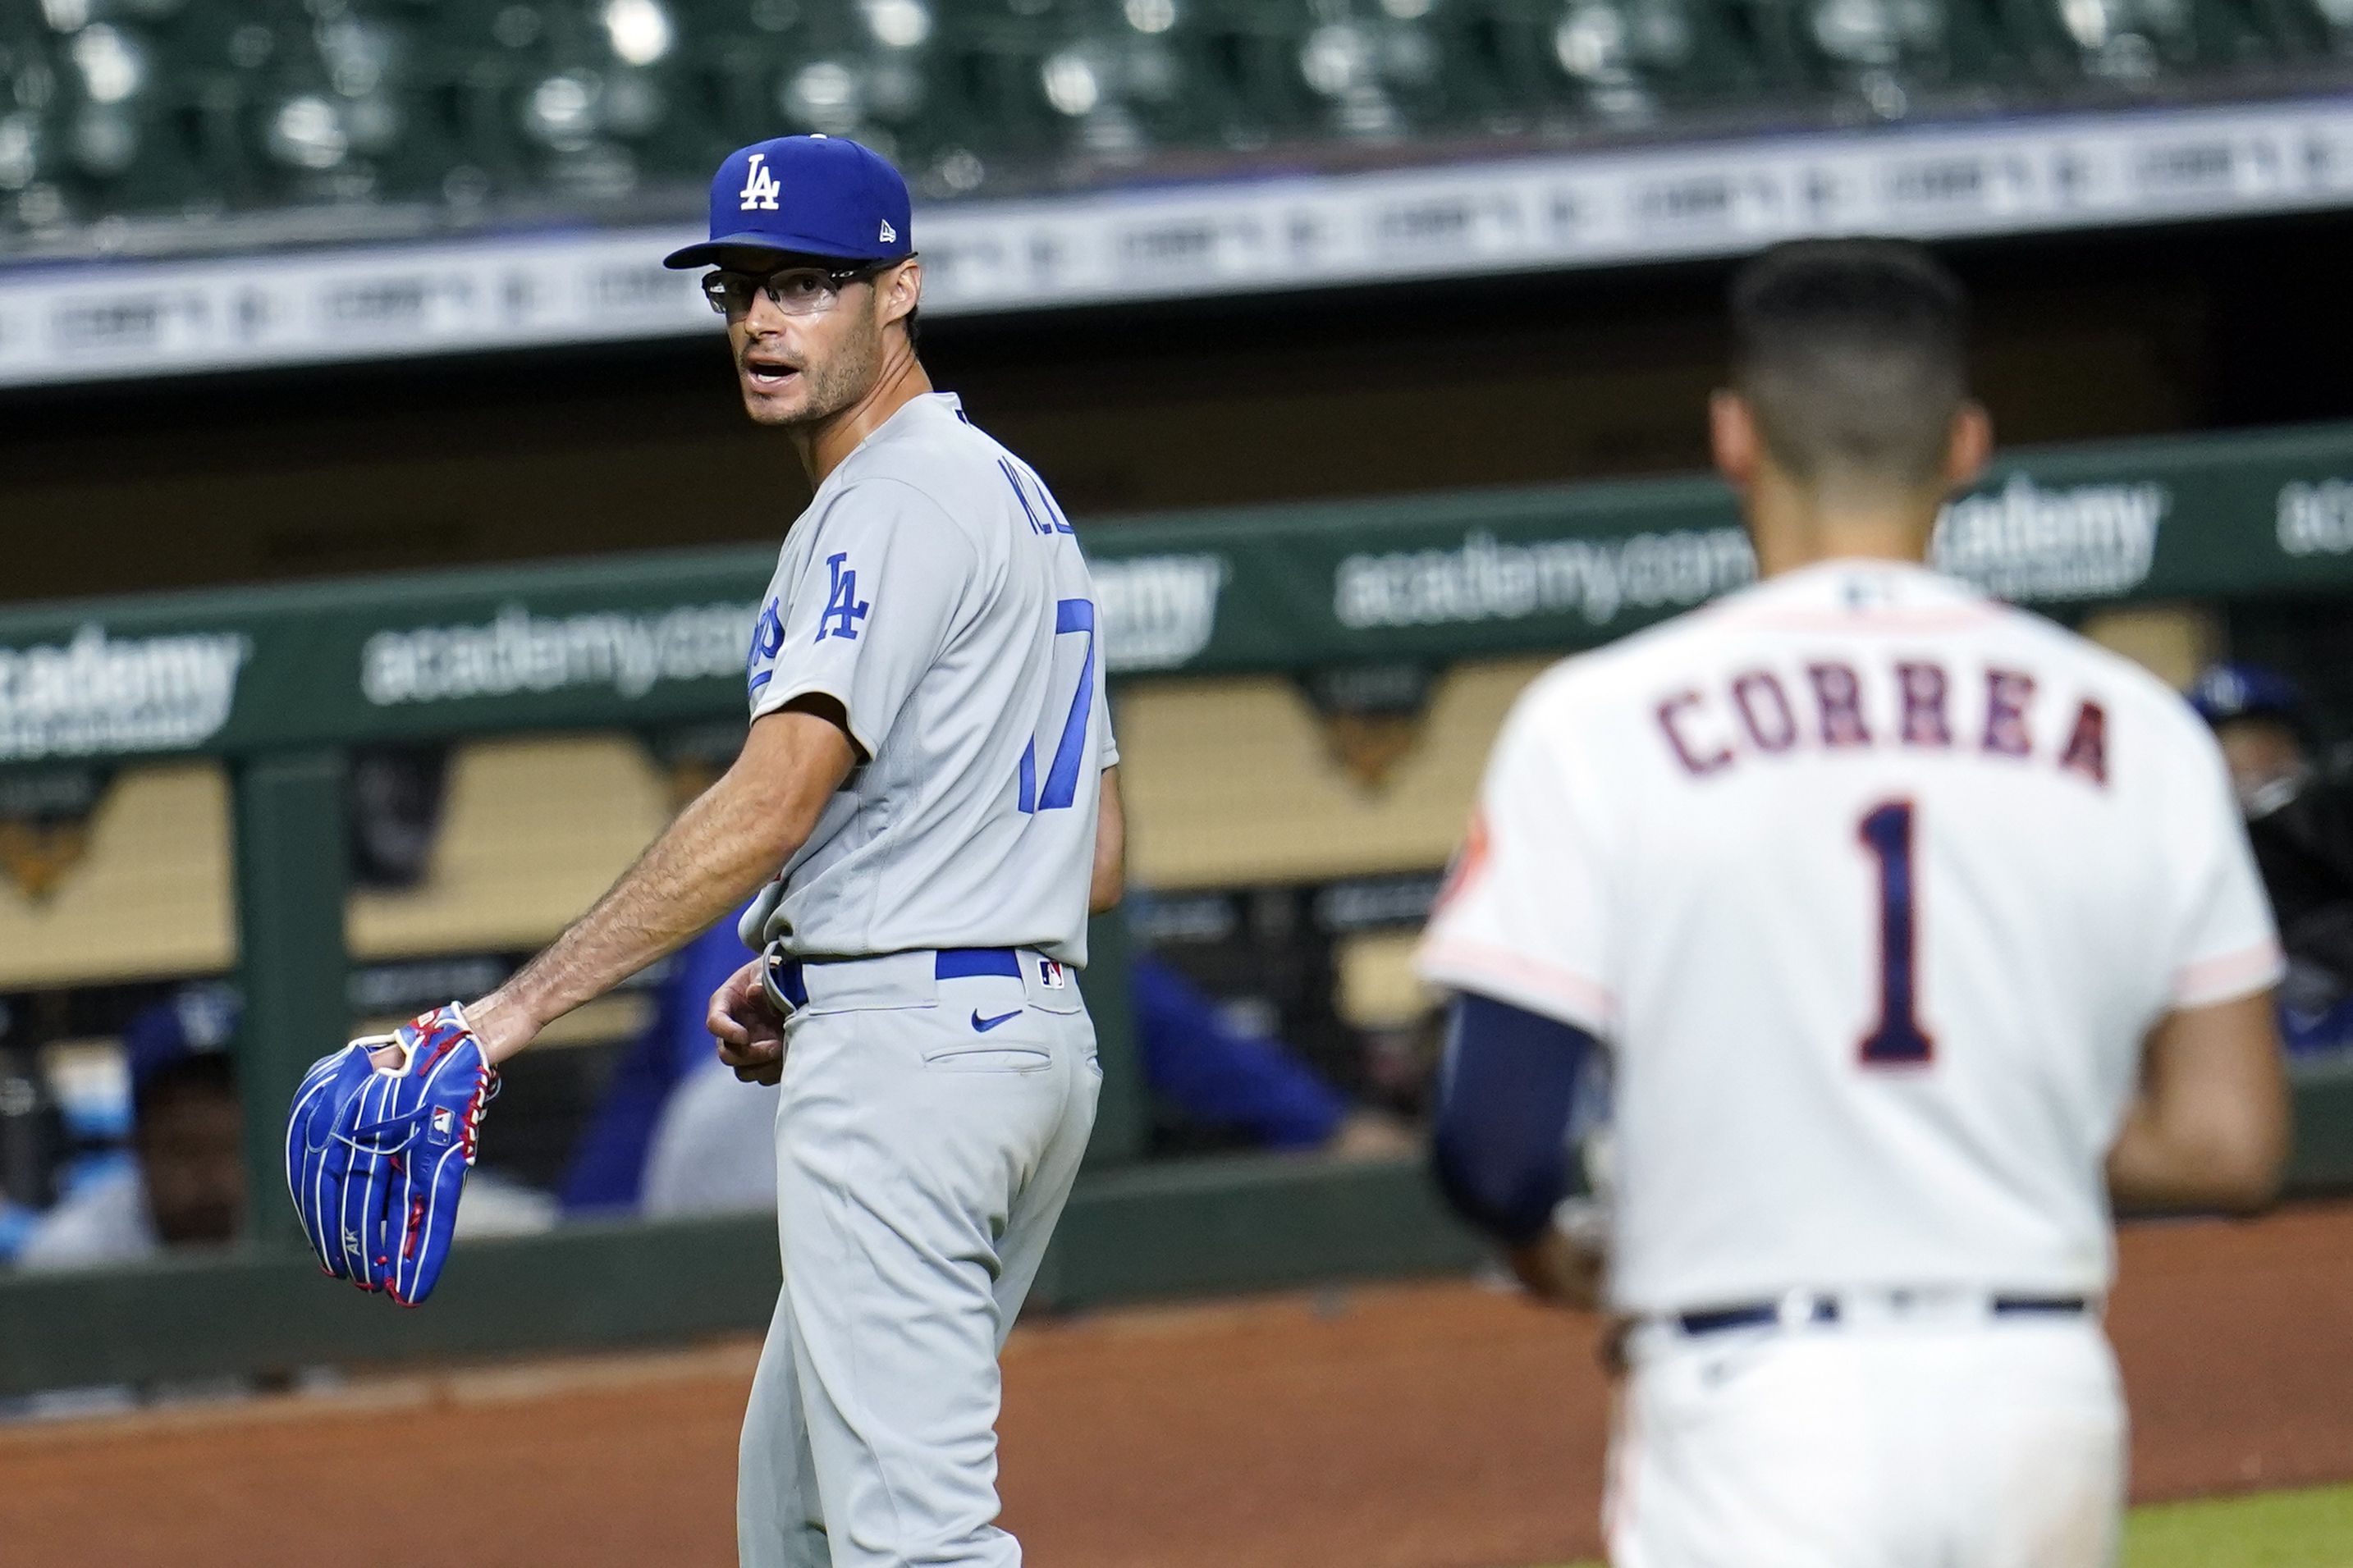 Joe Kelly of LA Dodgers suspended 8 games for throwing at Astros - ABC13  Houston